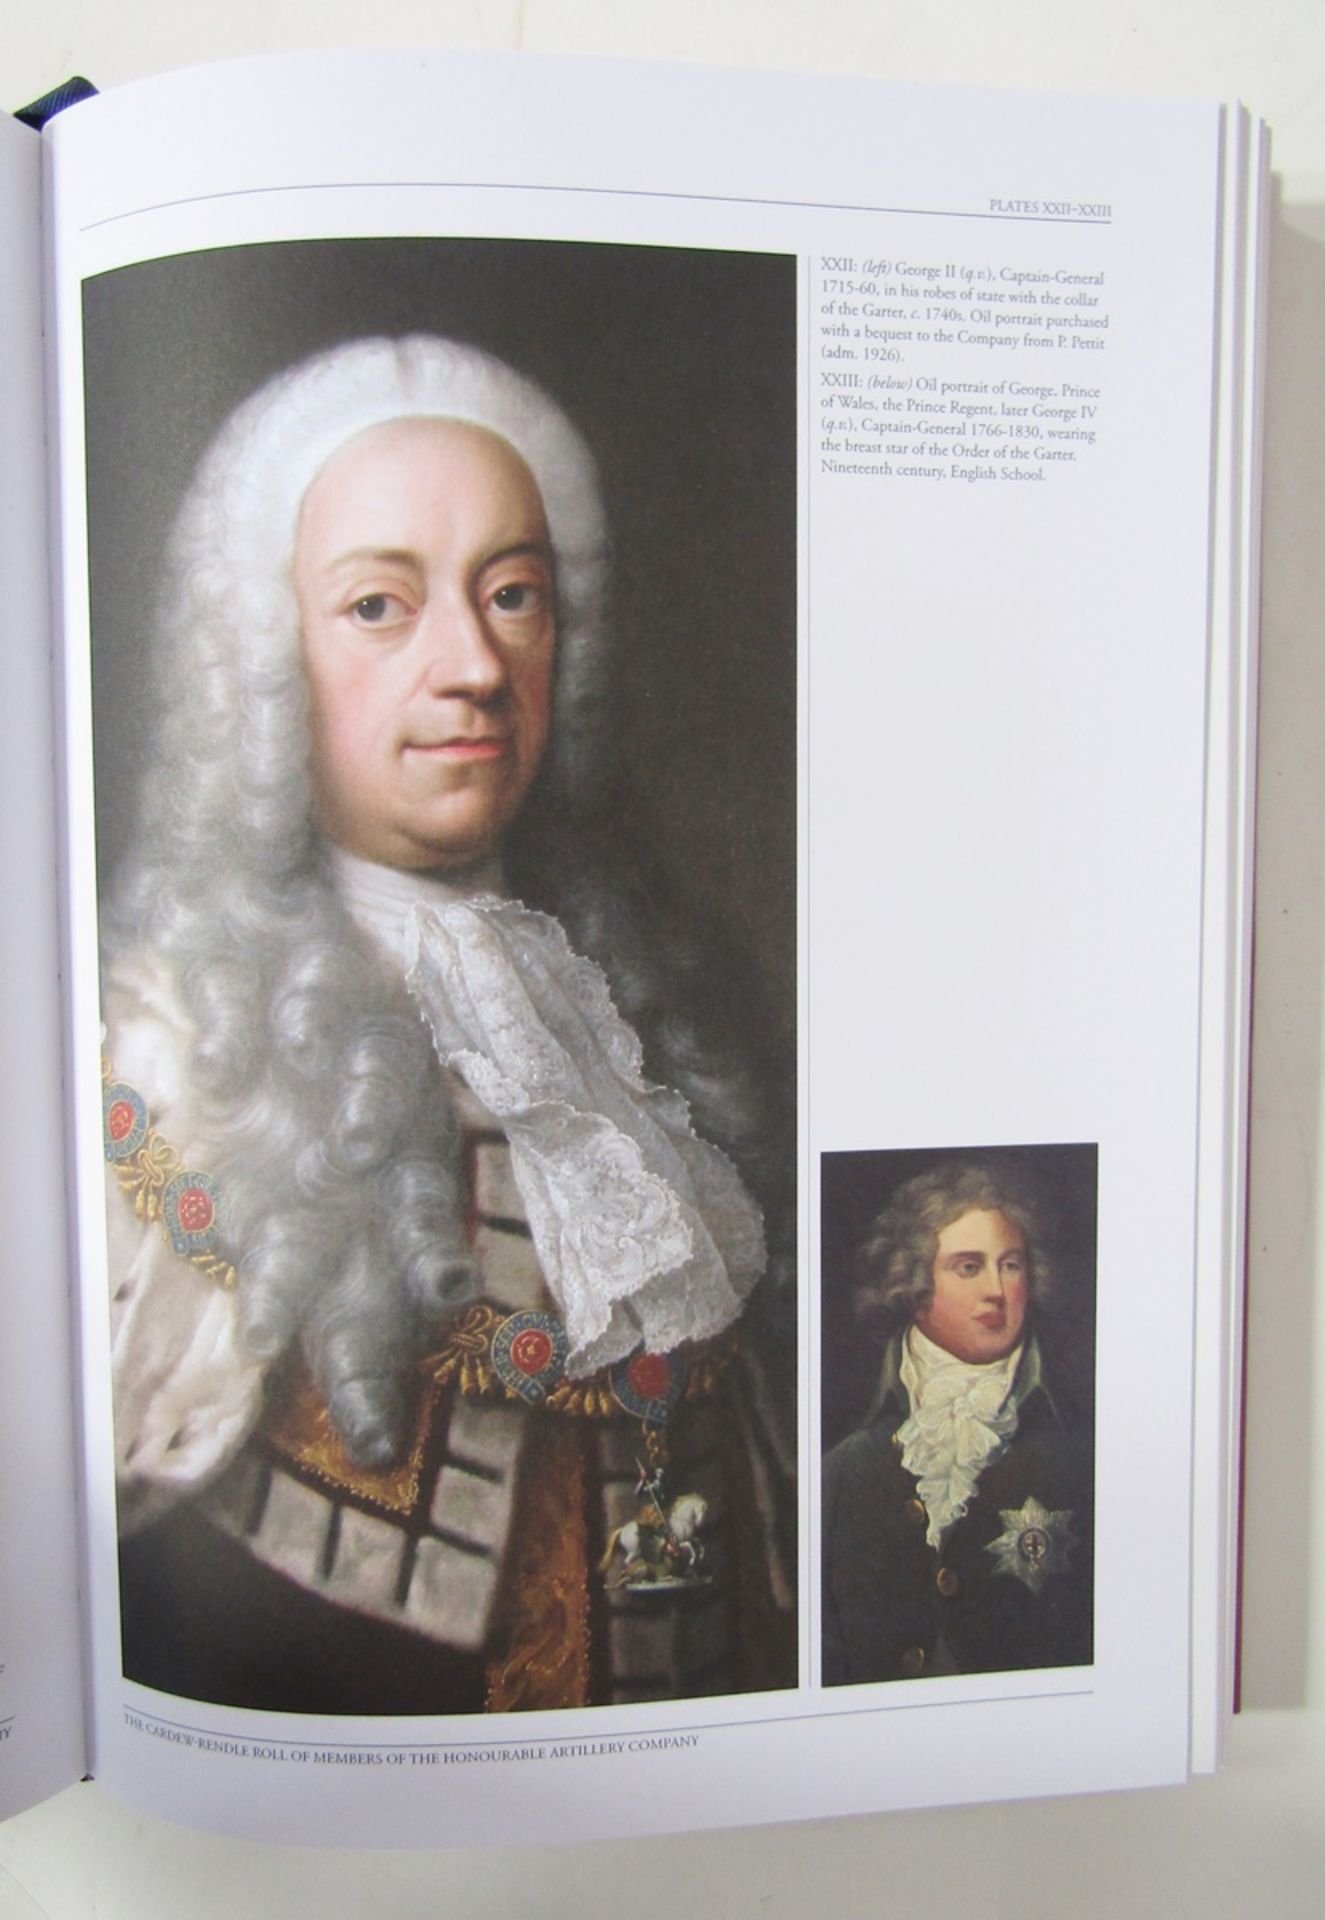 Bennett, Kirsty "The Cardew-Rendle Roll: A Biographical Directory of The Honourable Artillery - Image 10 of 23